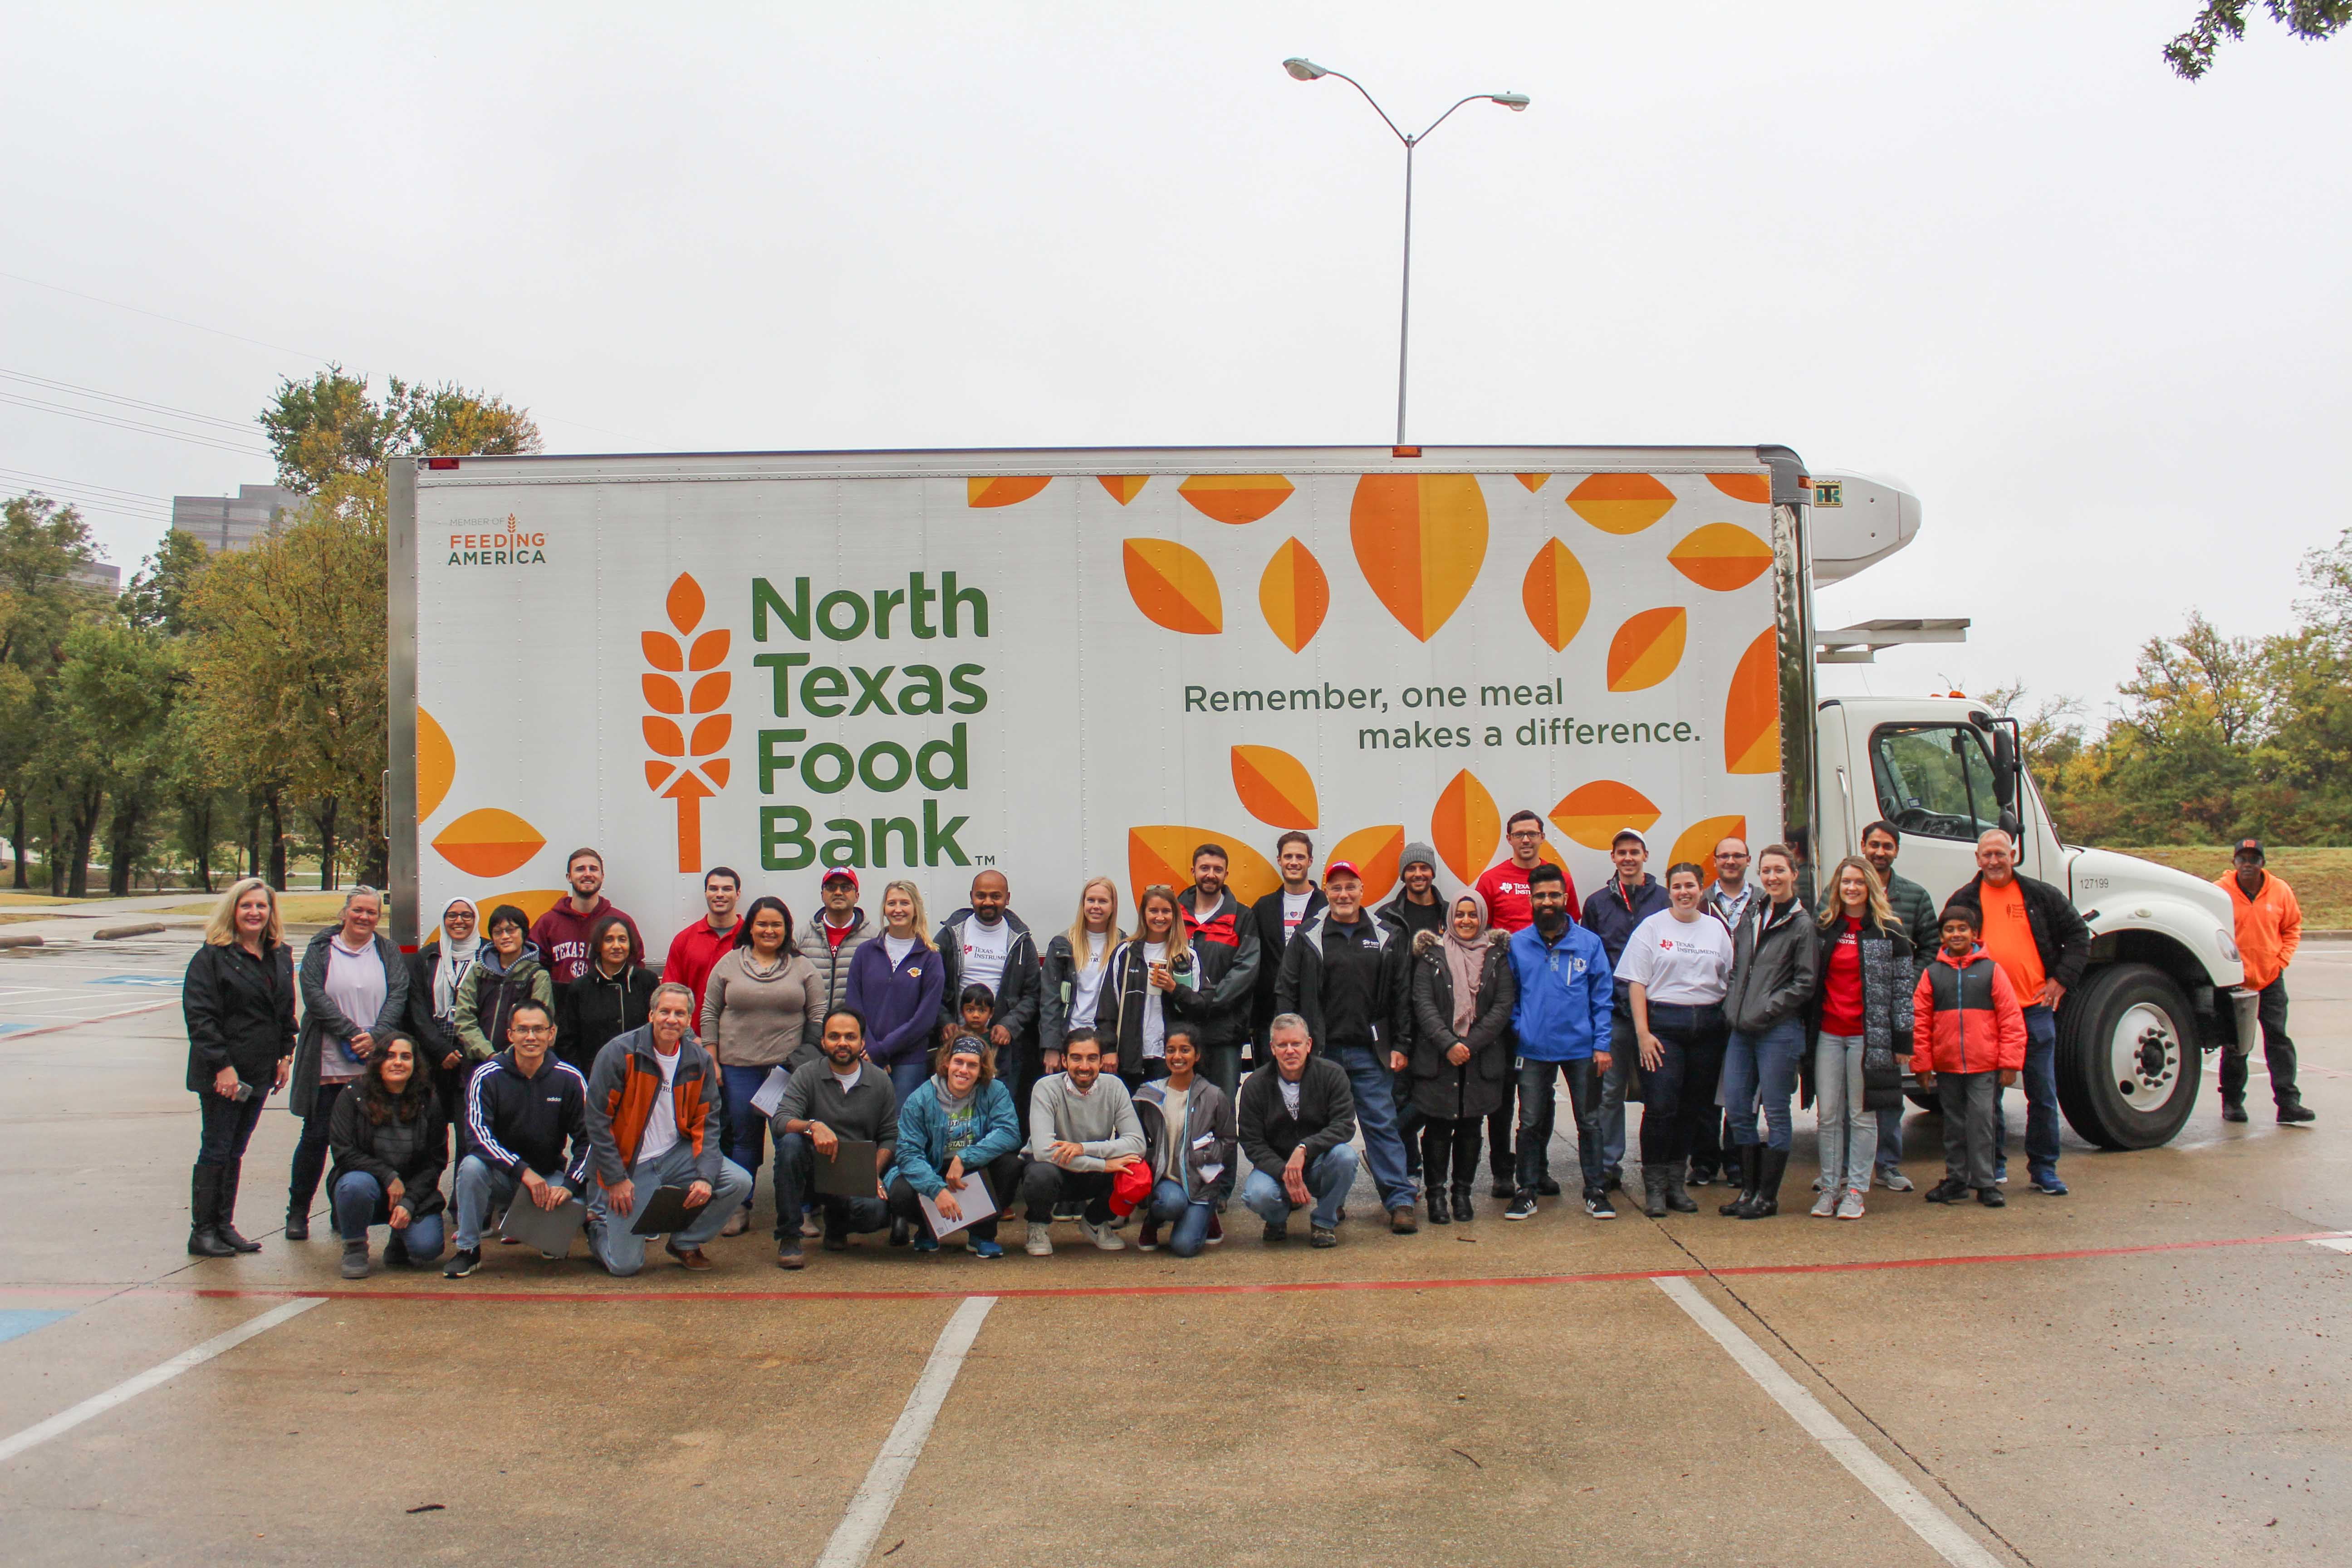 Team members from TI helped the North Texas Food Bank distribute food to the Hamilton Park neigborhood following the devastating tornadoes that occured on October 20. 